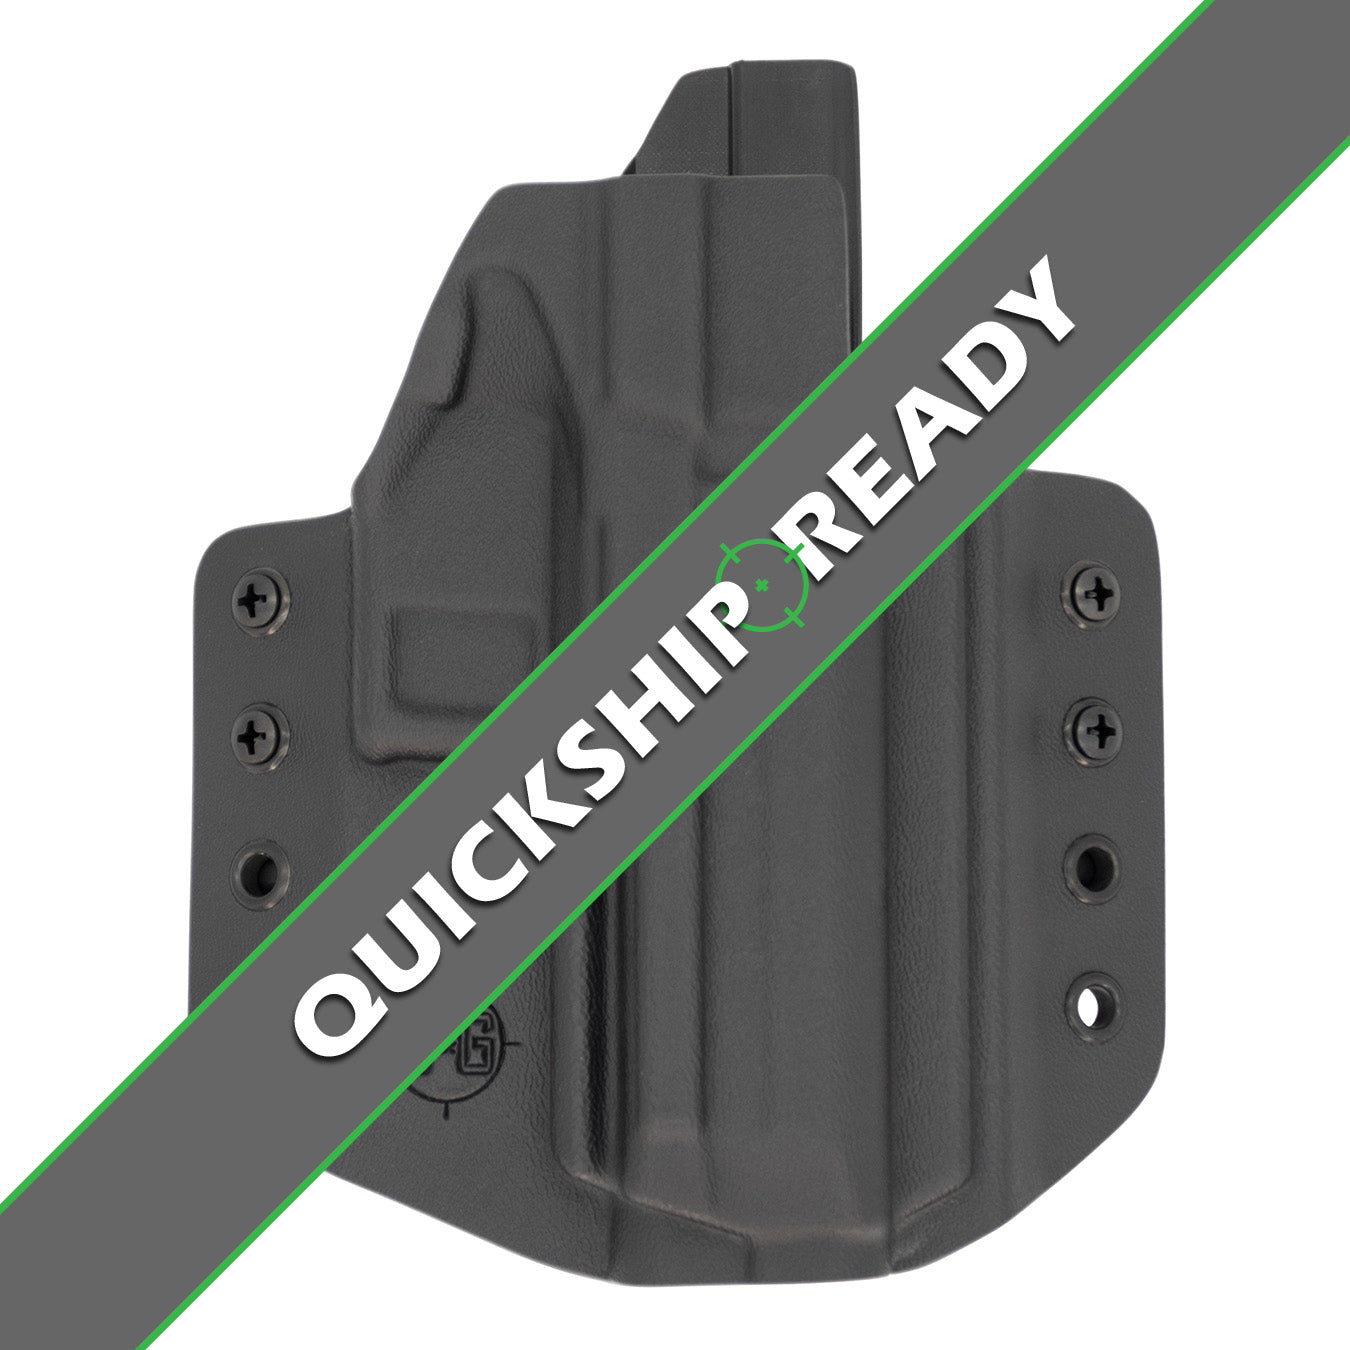 This is the quickship C&G Holsters Covert Series Outside the waistband holster for an IWI Masada.